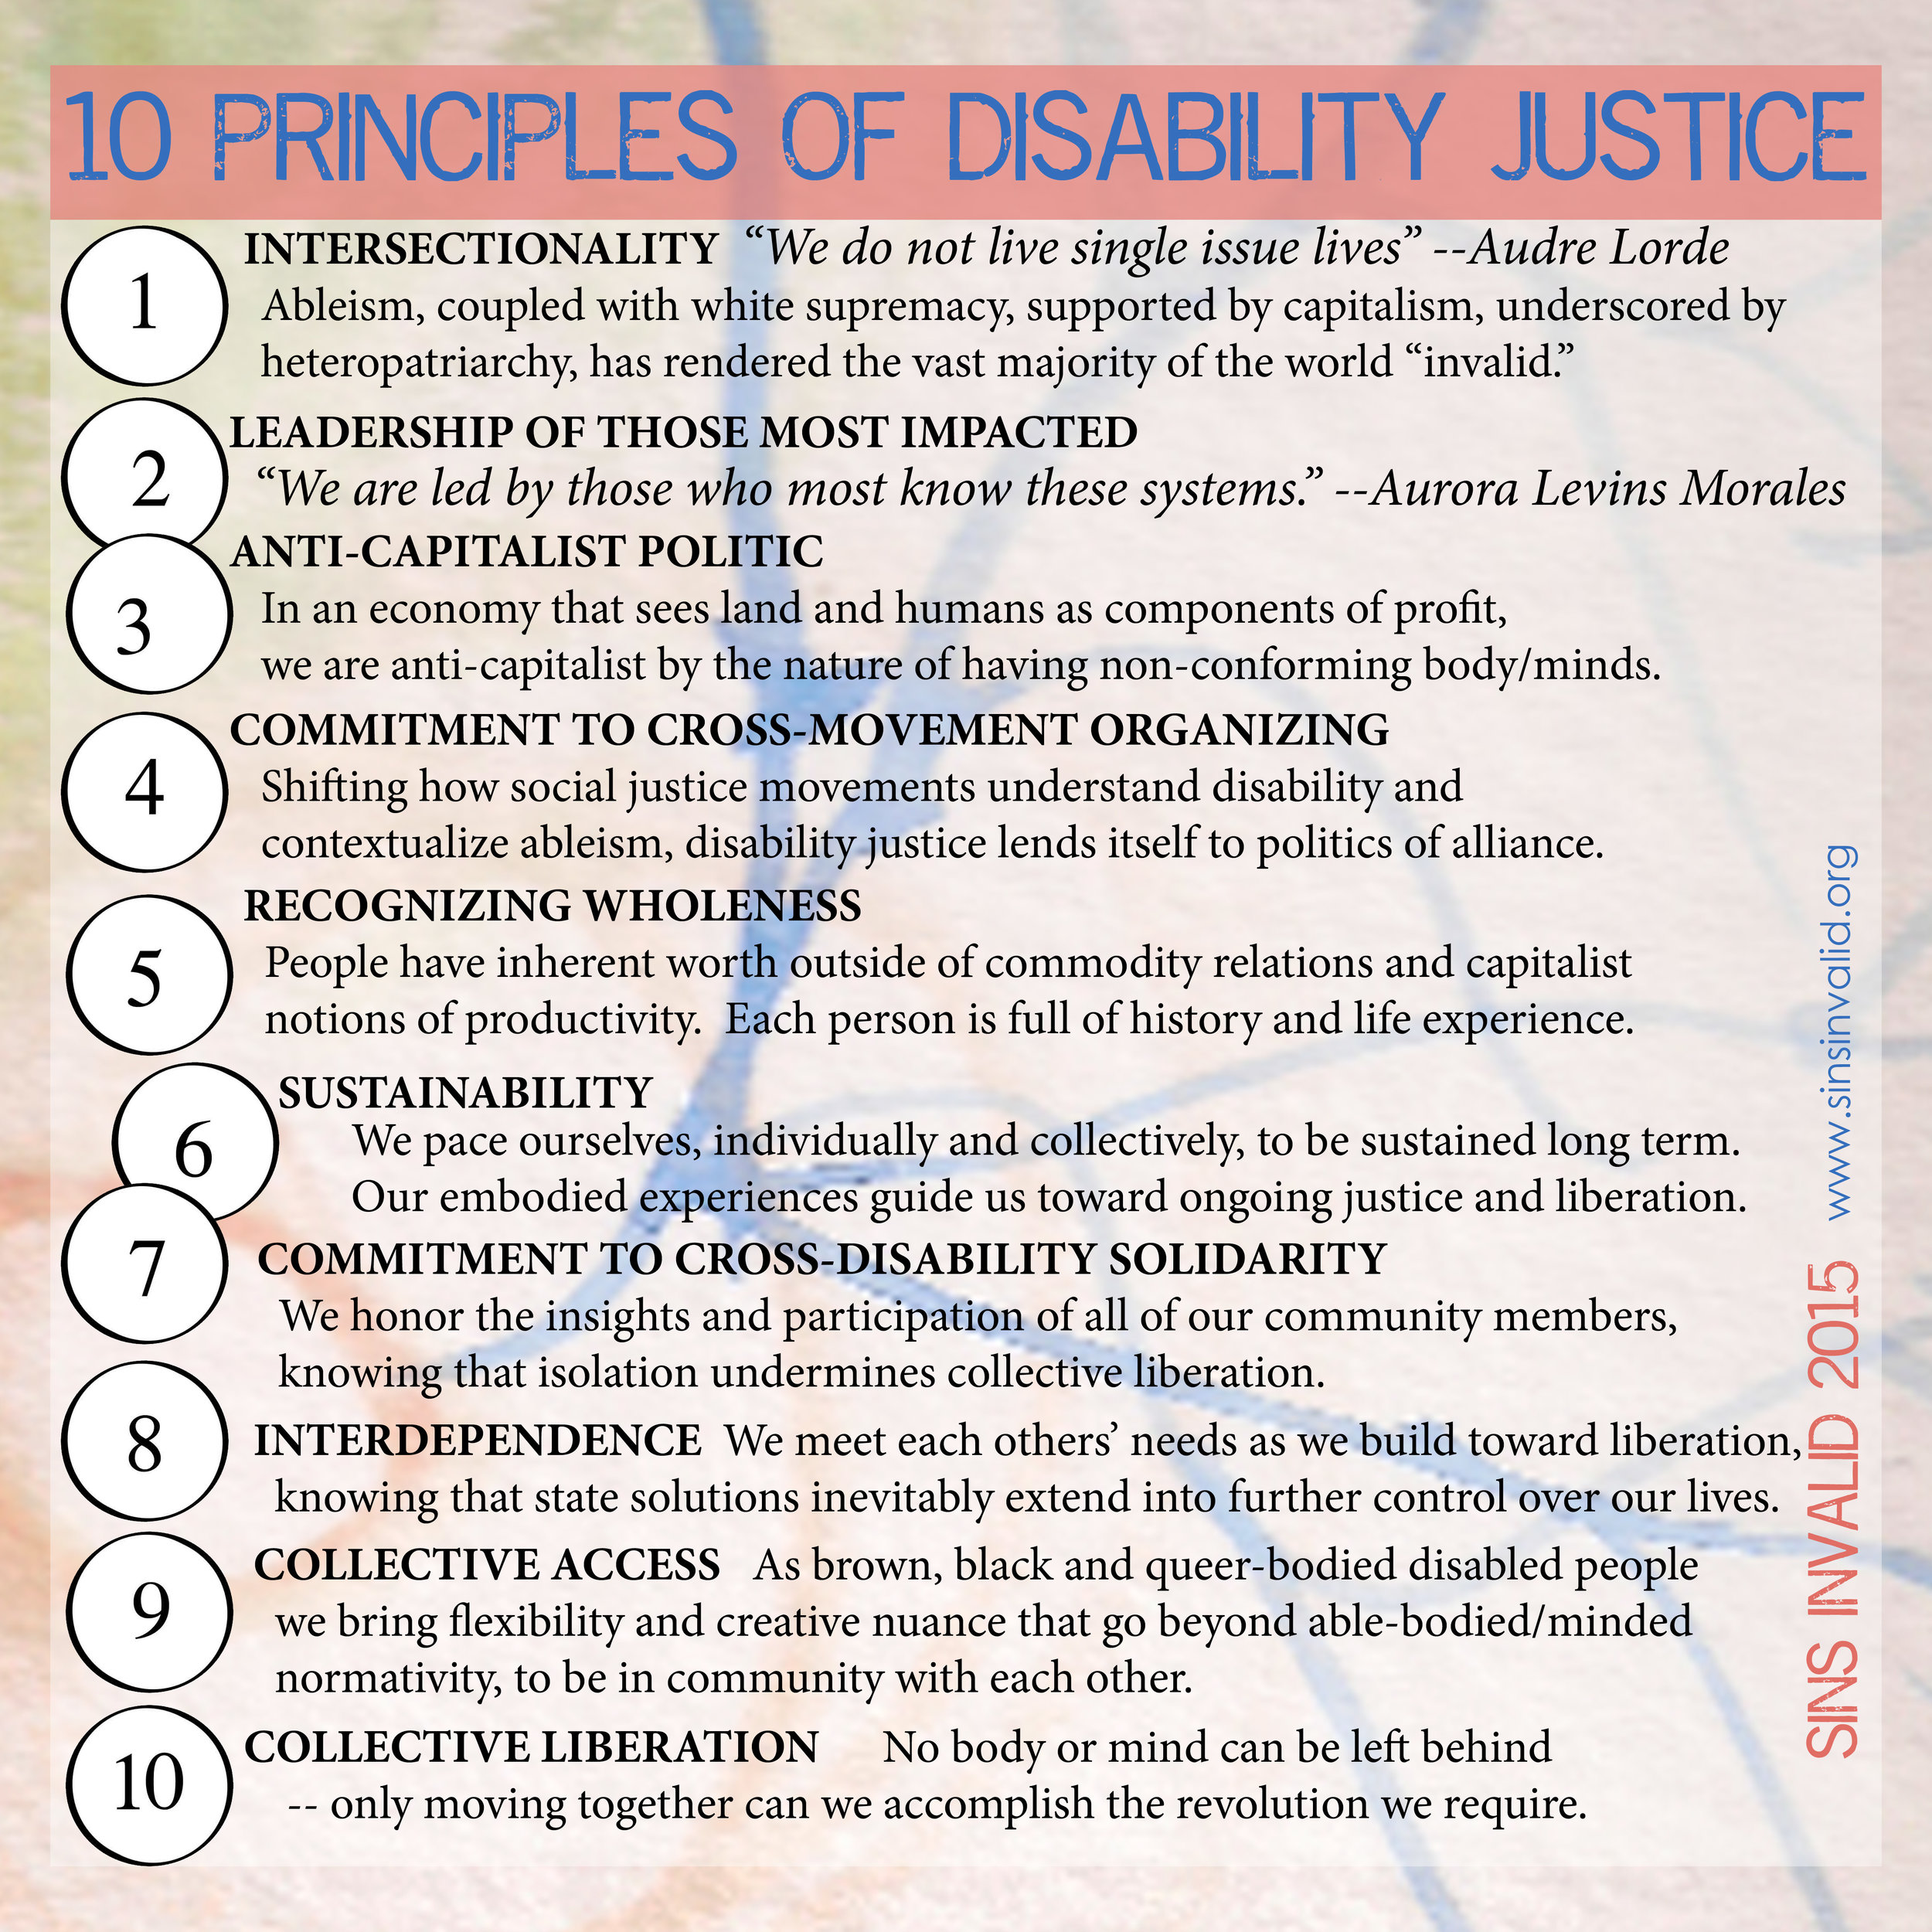 Light pink, blue, and green infographic created by Sins Invalid in 2015. The infographic lists the 10 principles of disability justice and their definitions. The ten principles listed are as follows: intersectionality, leadership of the most impacted, anti-capitalist politic, commitment to cross-movement organizing, recognizing wholeness, sustainability, commitment to cross-disability solidarity, interdependence, collective access, and collective liberation. Linked is the full plain-text version.